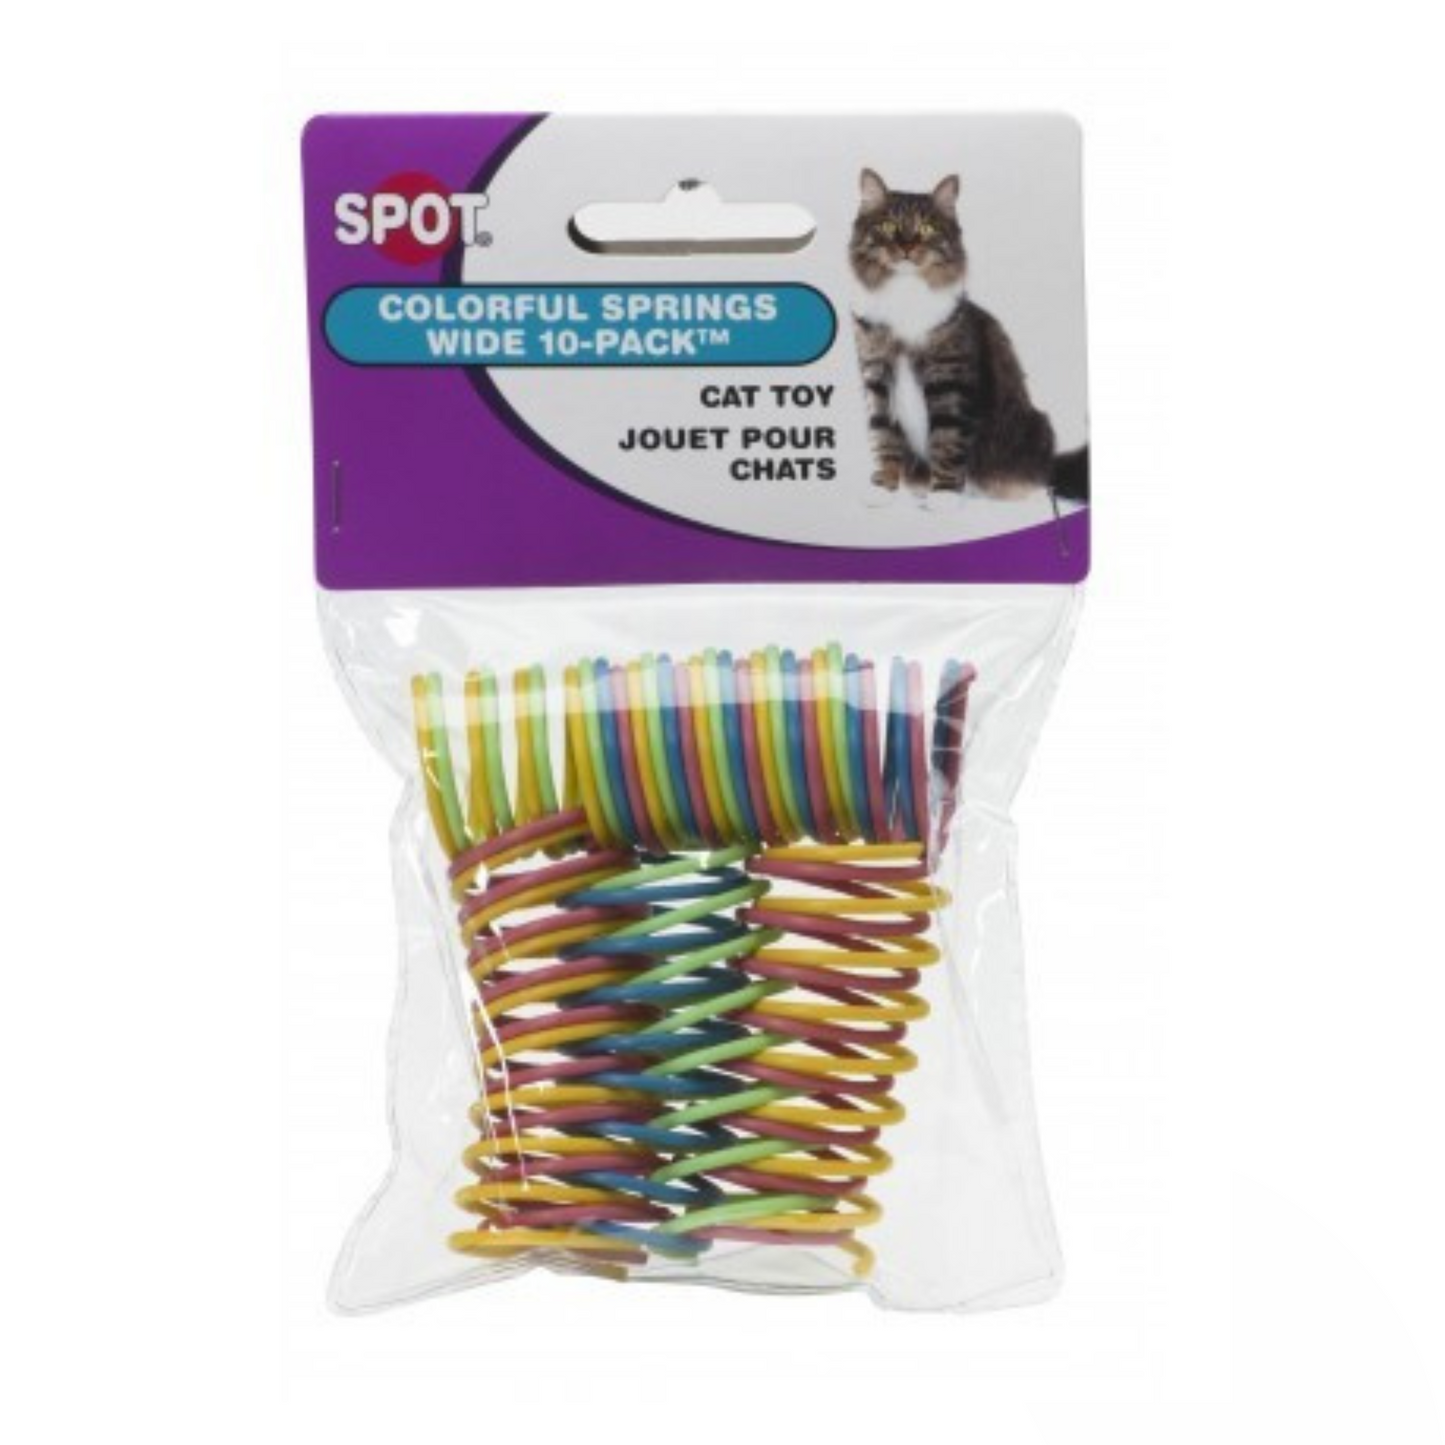 Spot Wide & Colorful Springs Cat Toy - 10 Pack